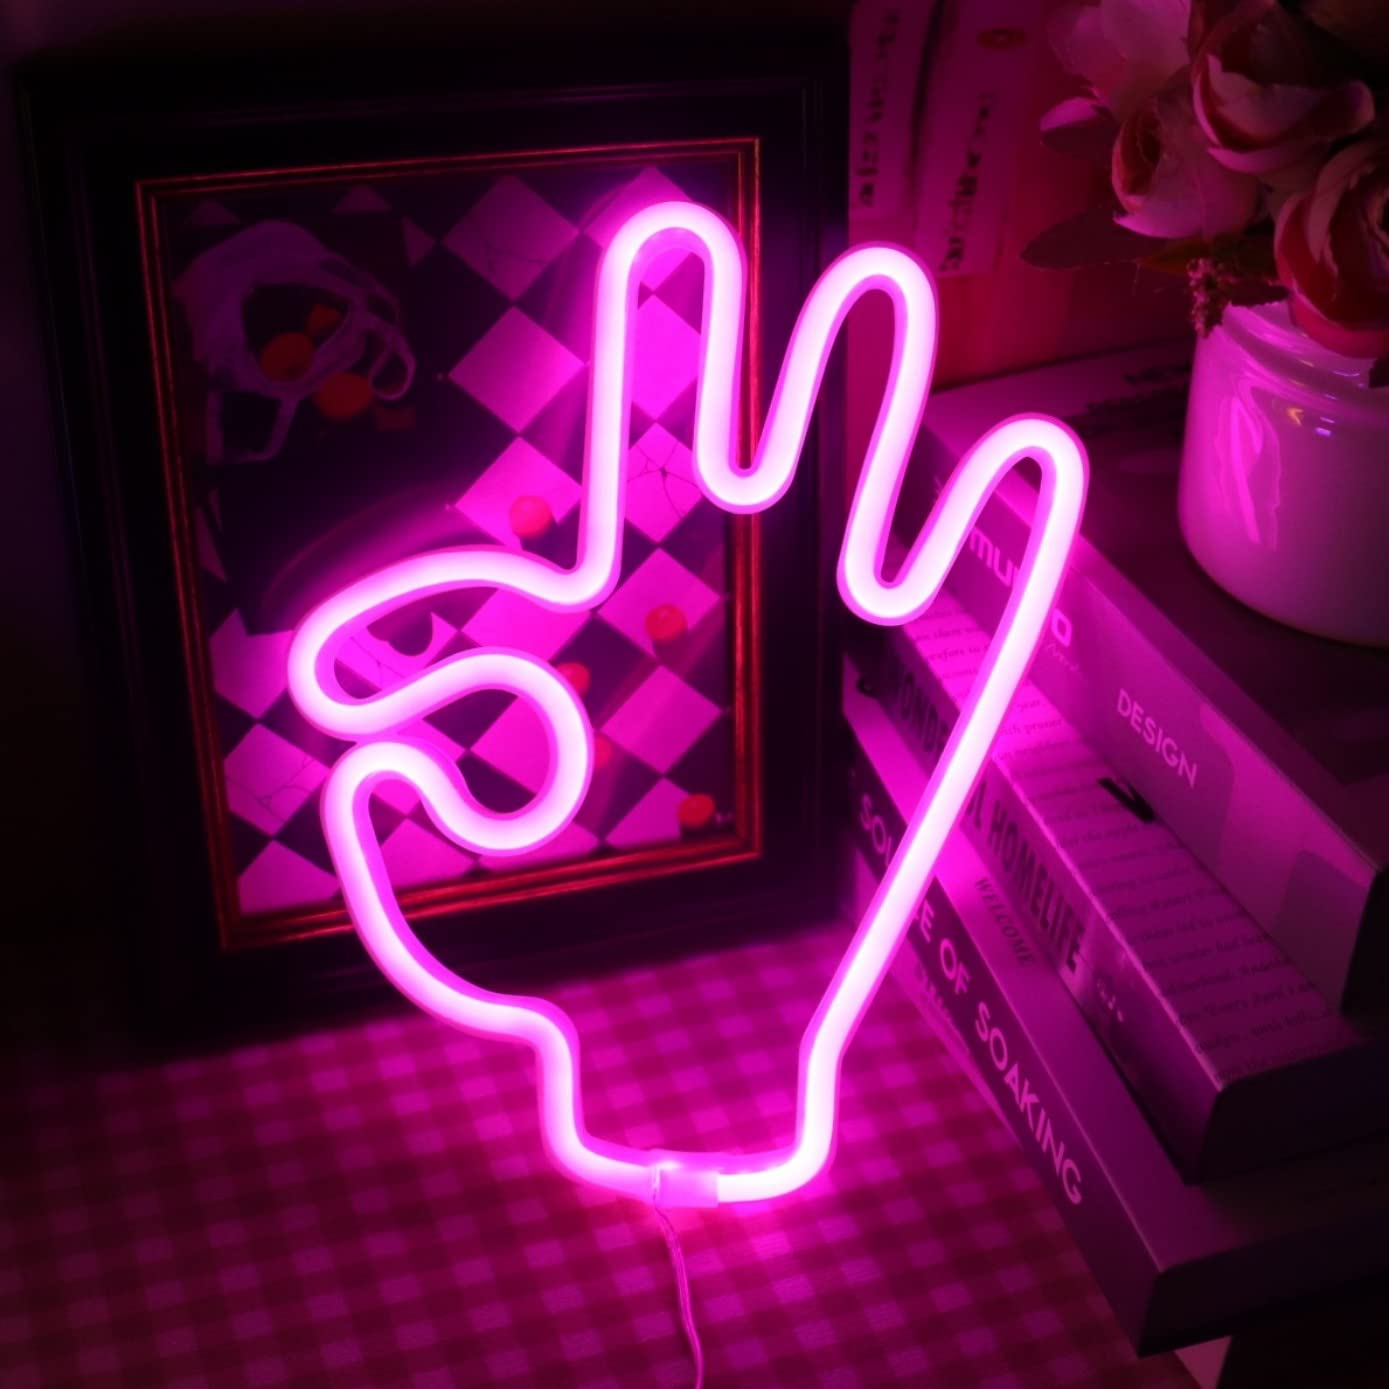 QiaoFei OK Gesture Hand Shape Finger Neon Sign Hanging Decorative Neon Light USB Or Battery Operated For Home Bedroom Bar Restaurant Christmas Birthday Party Gift LED Art Wall Decoration Light Pink